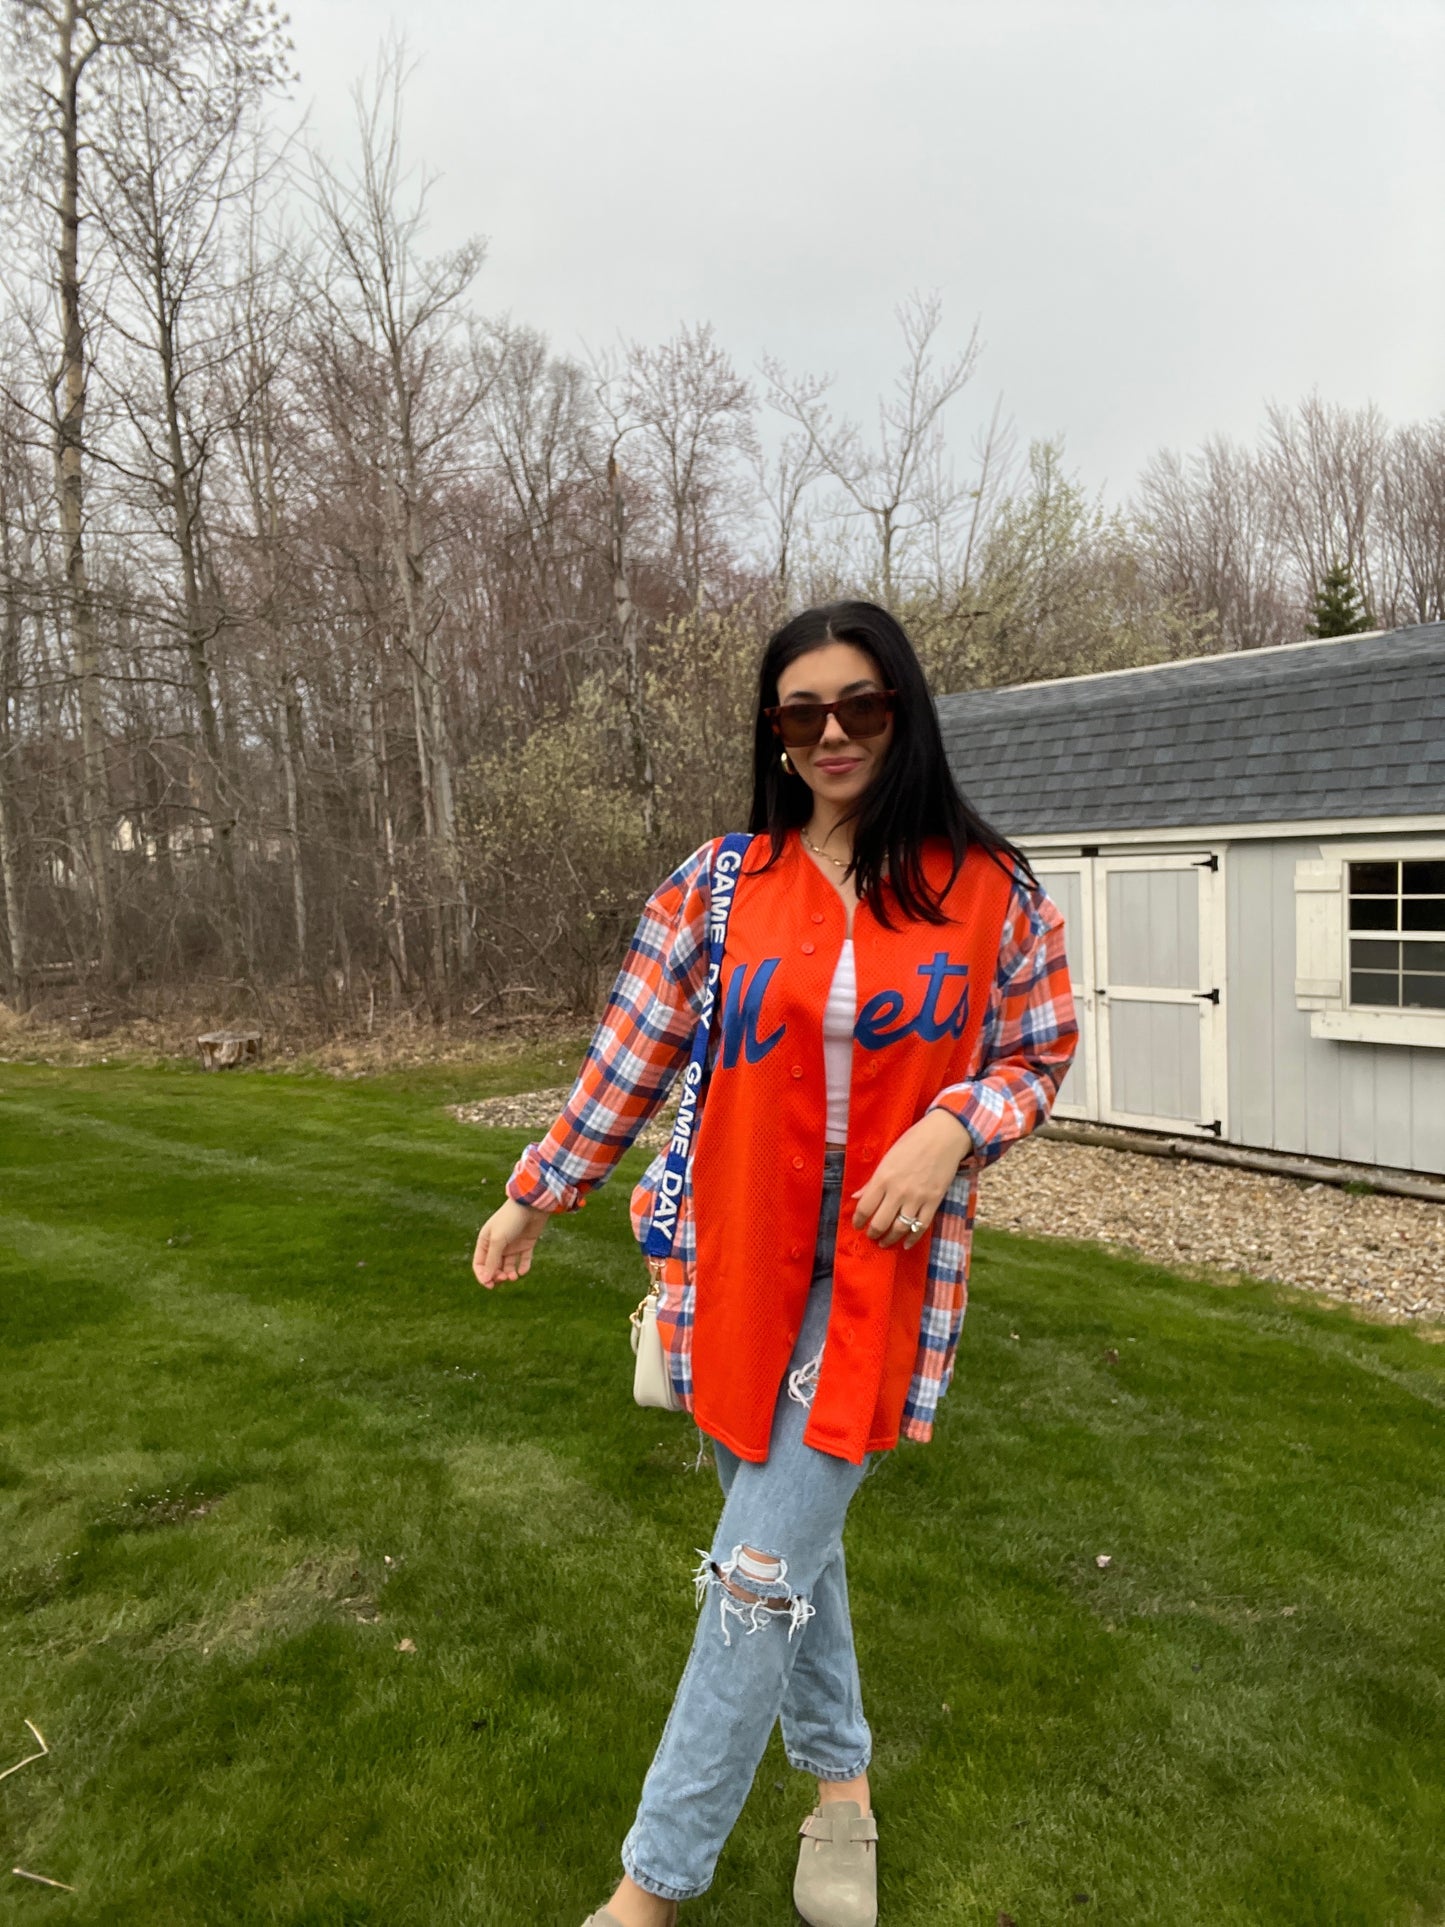 NY METS JERSEY X FLANNEL